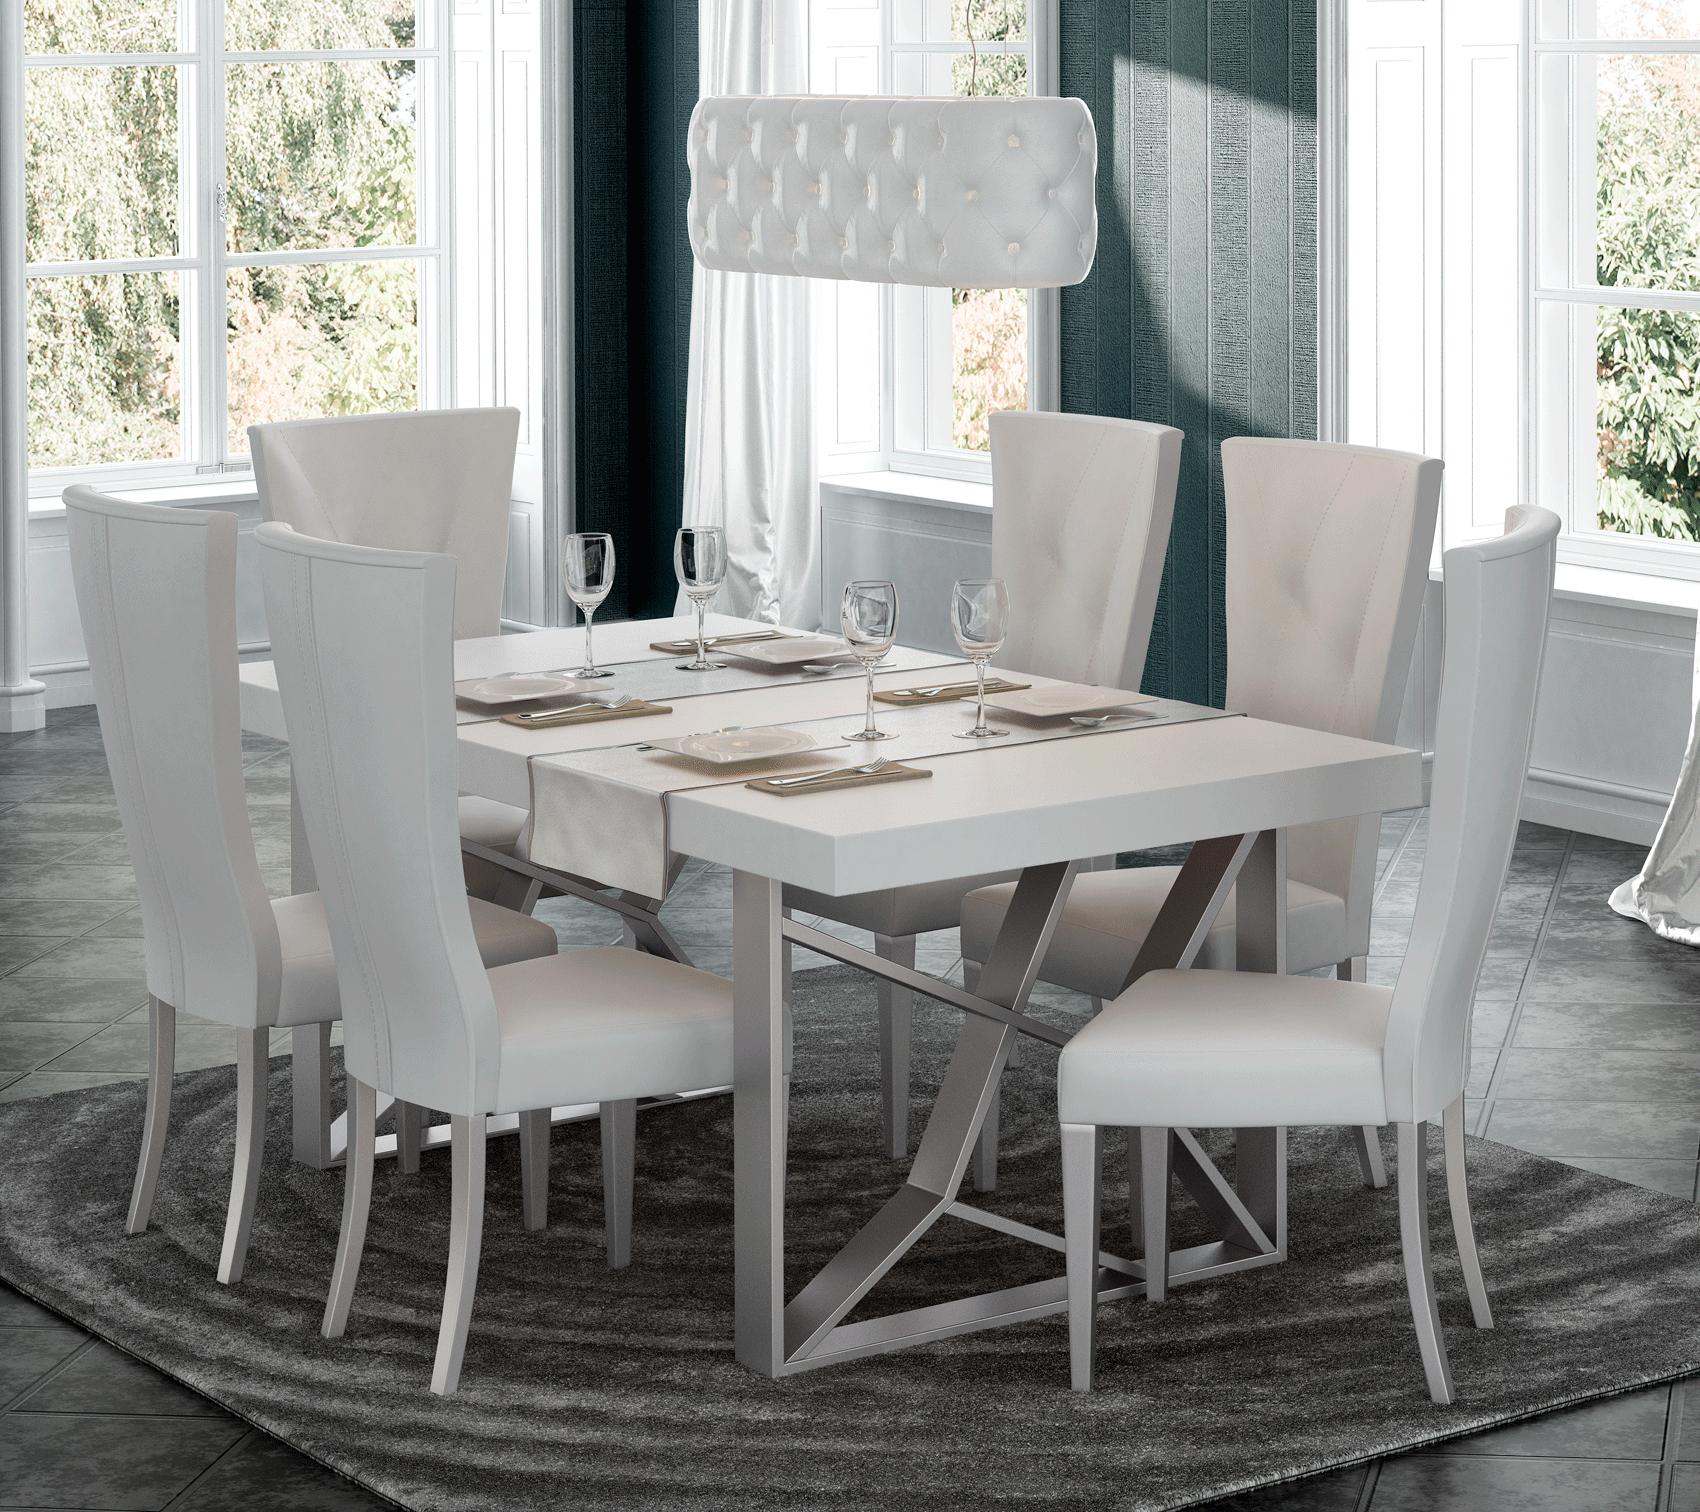 

    
White High Gloss Lacquer Dining Table Modern Made in Spain ESF Kiu
